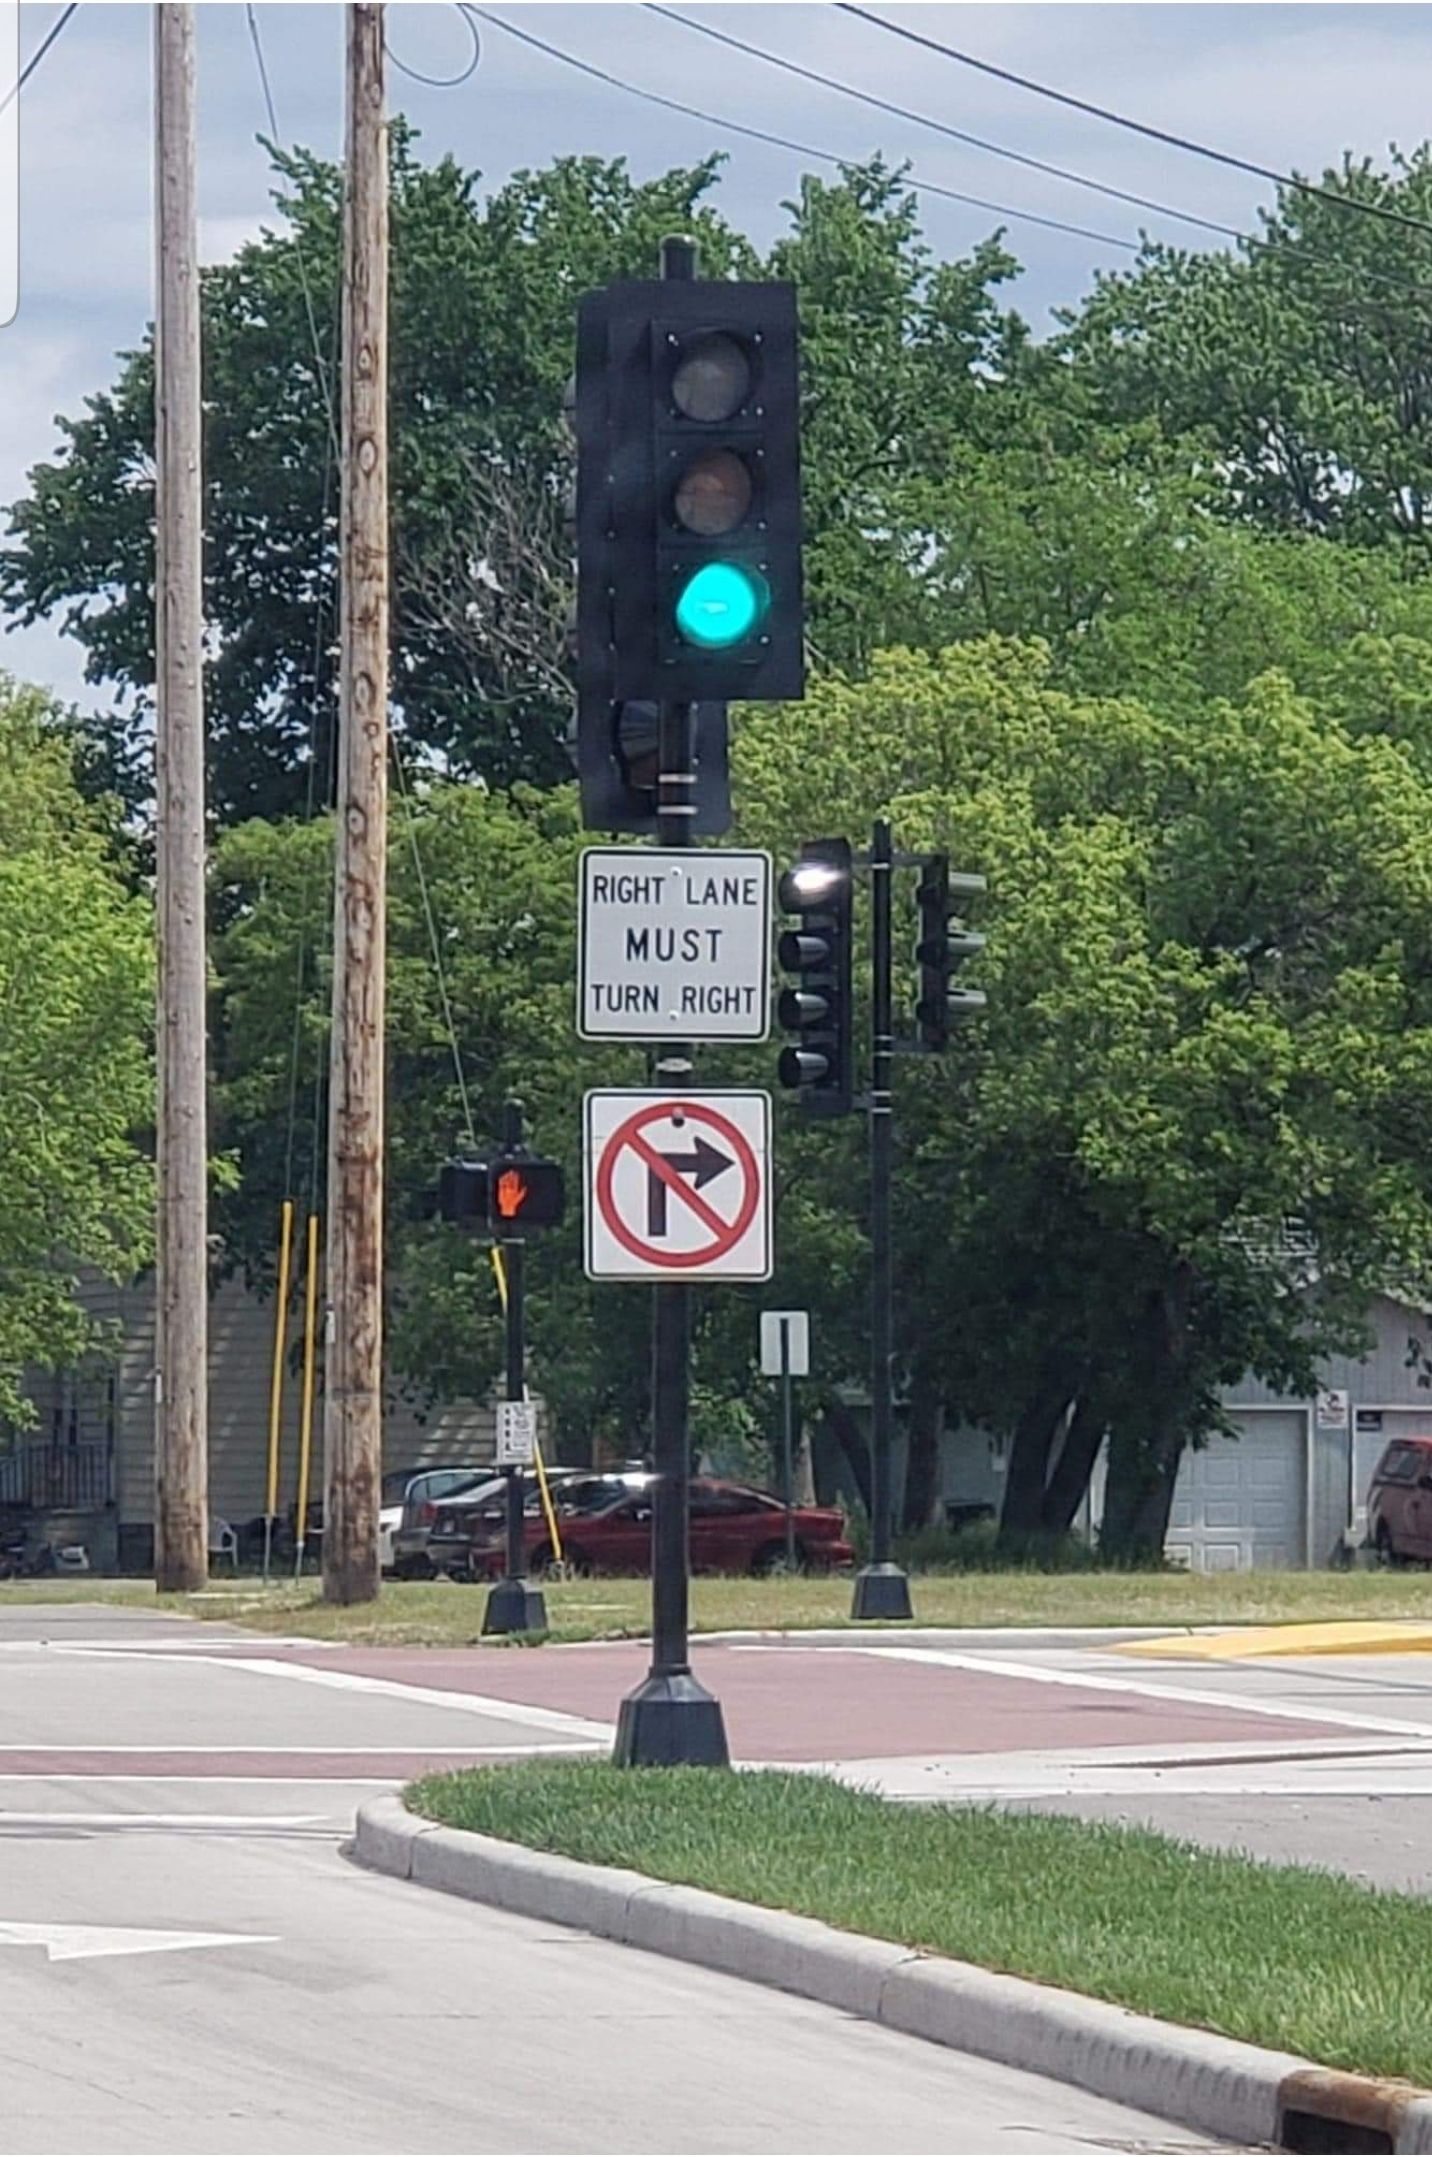 Sorry boss, can't make it in today. Stuck at a green light